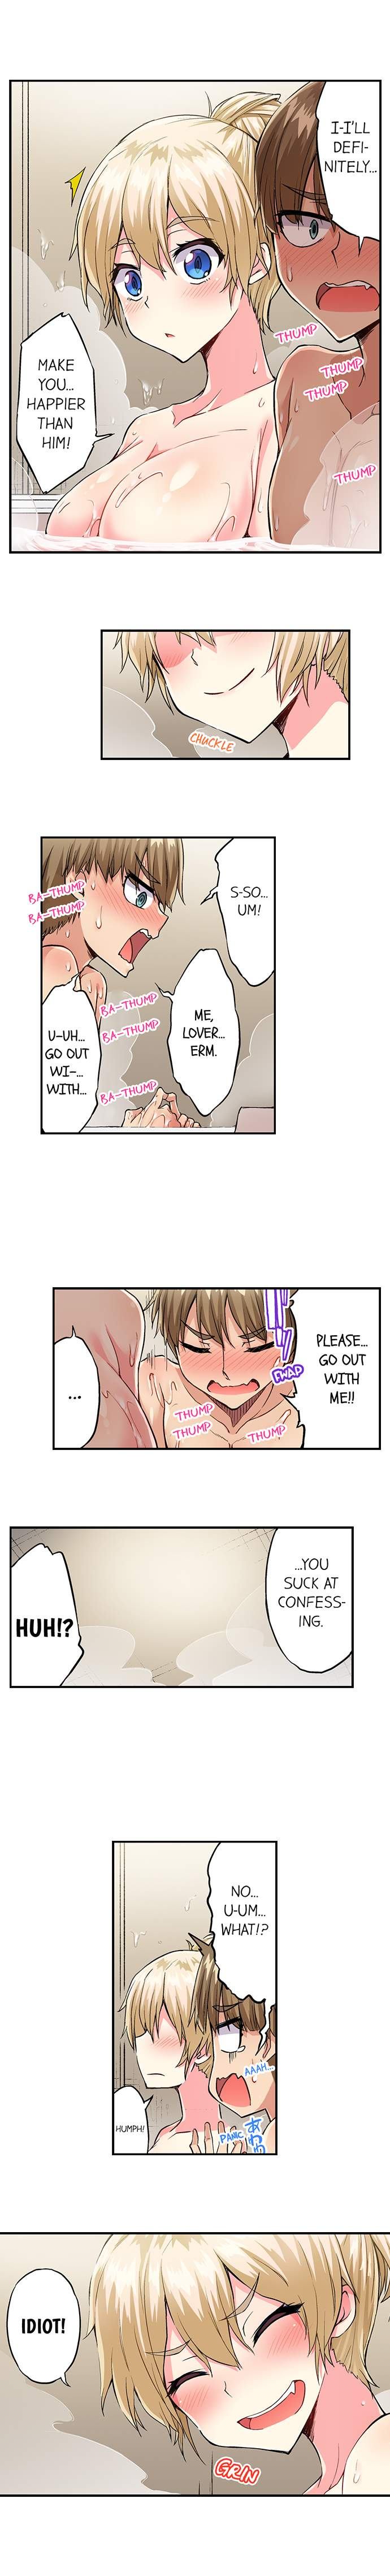 Traditional Job of Washing Girls’ Body - Chapter 162 Page 9